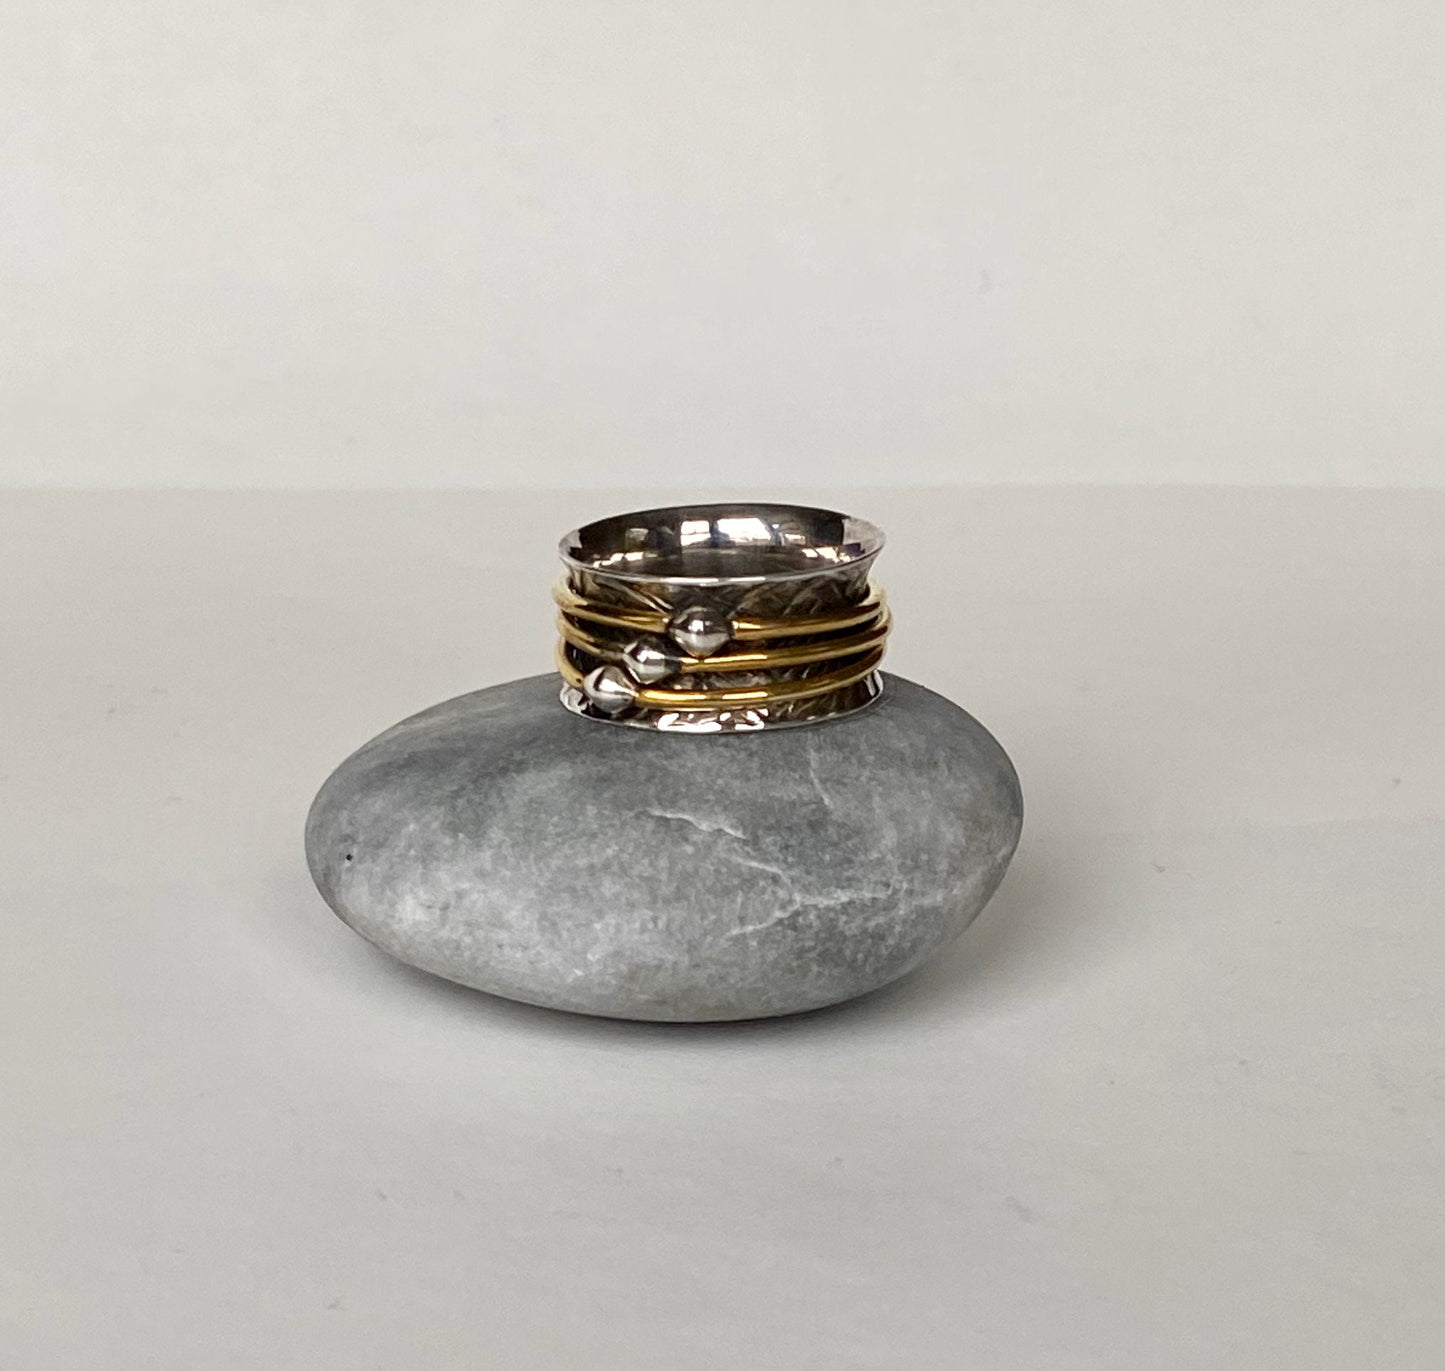 Handmade size 7 1/4 sterling silver and brass spinning ring.